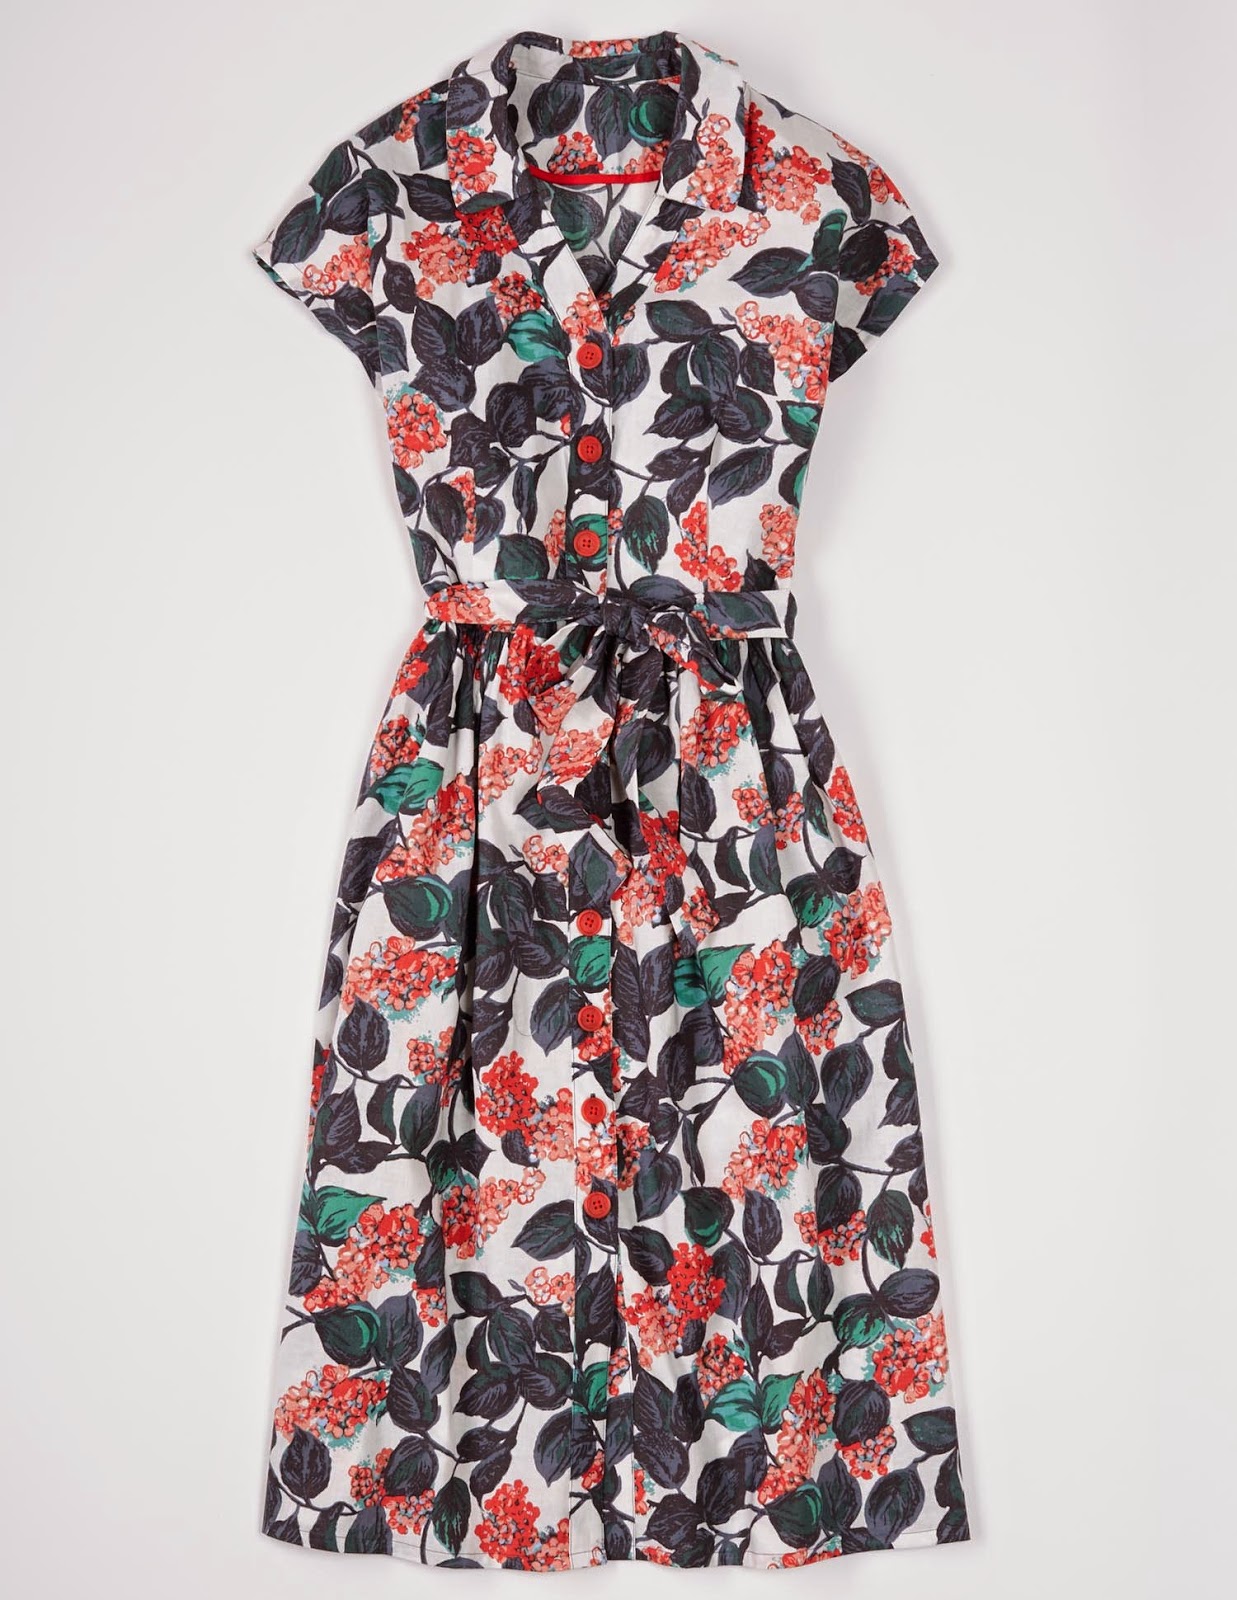 My Superfluities: Boden: Spring 2015 Preview Picks! Oversaturating You ...